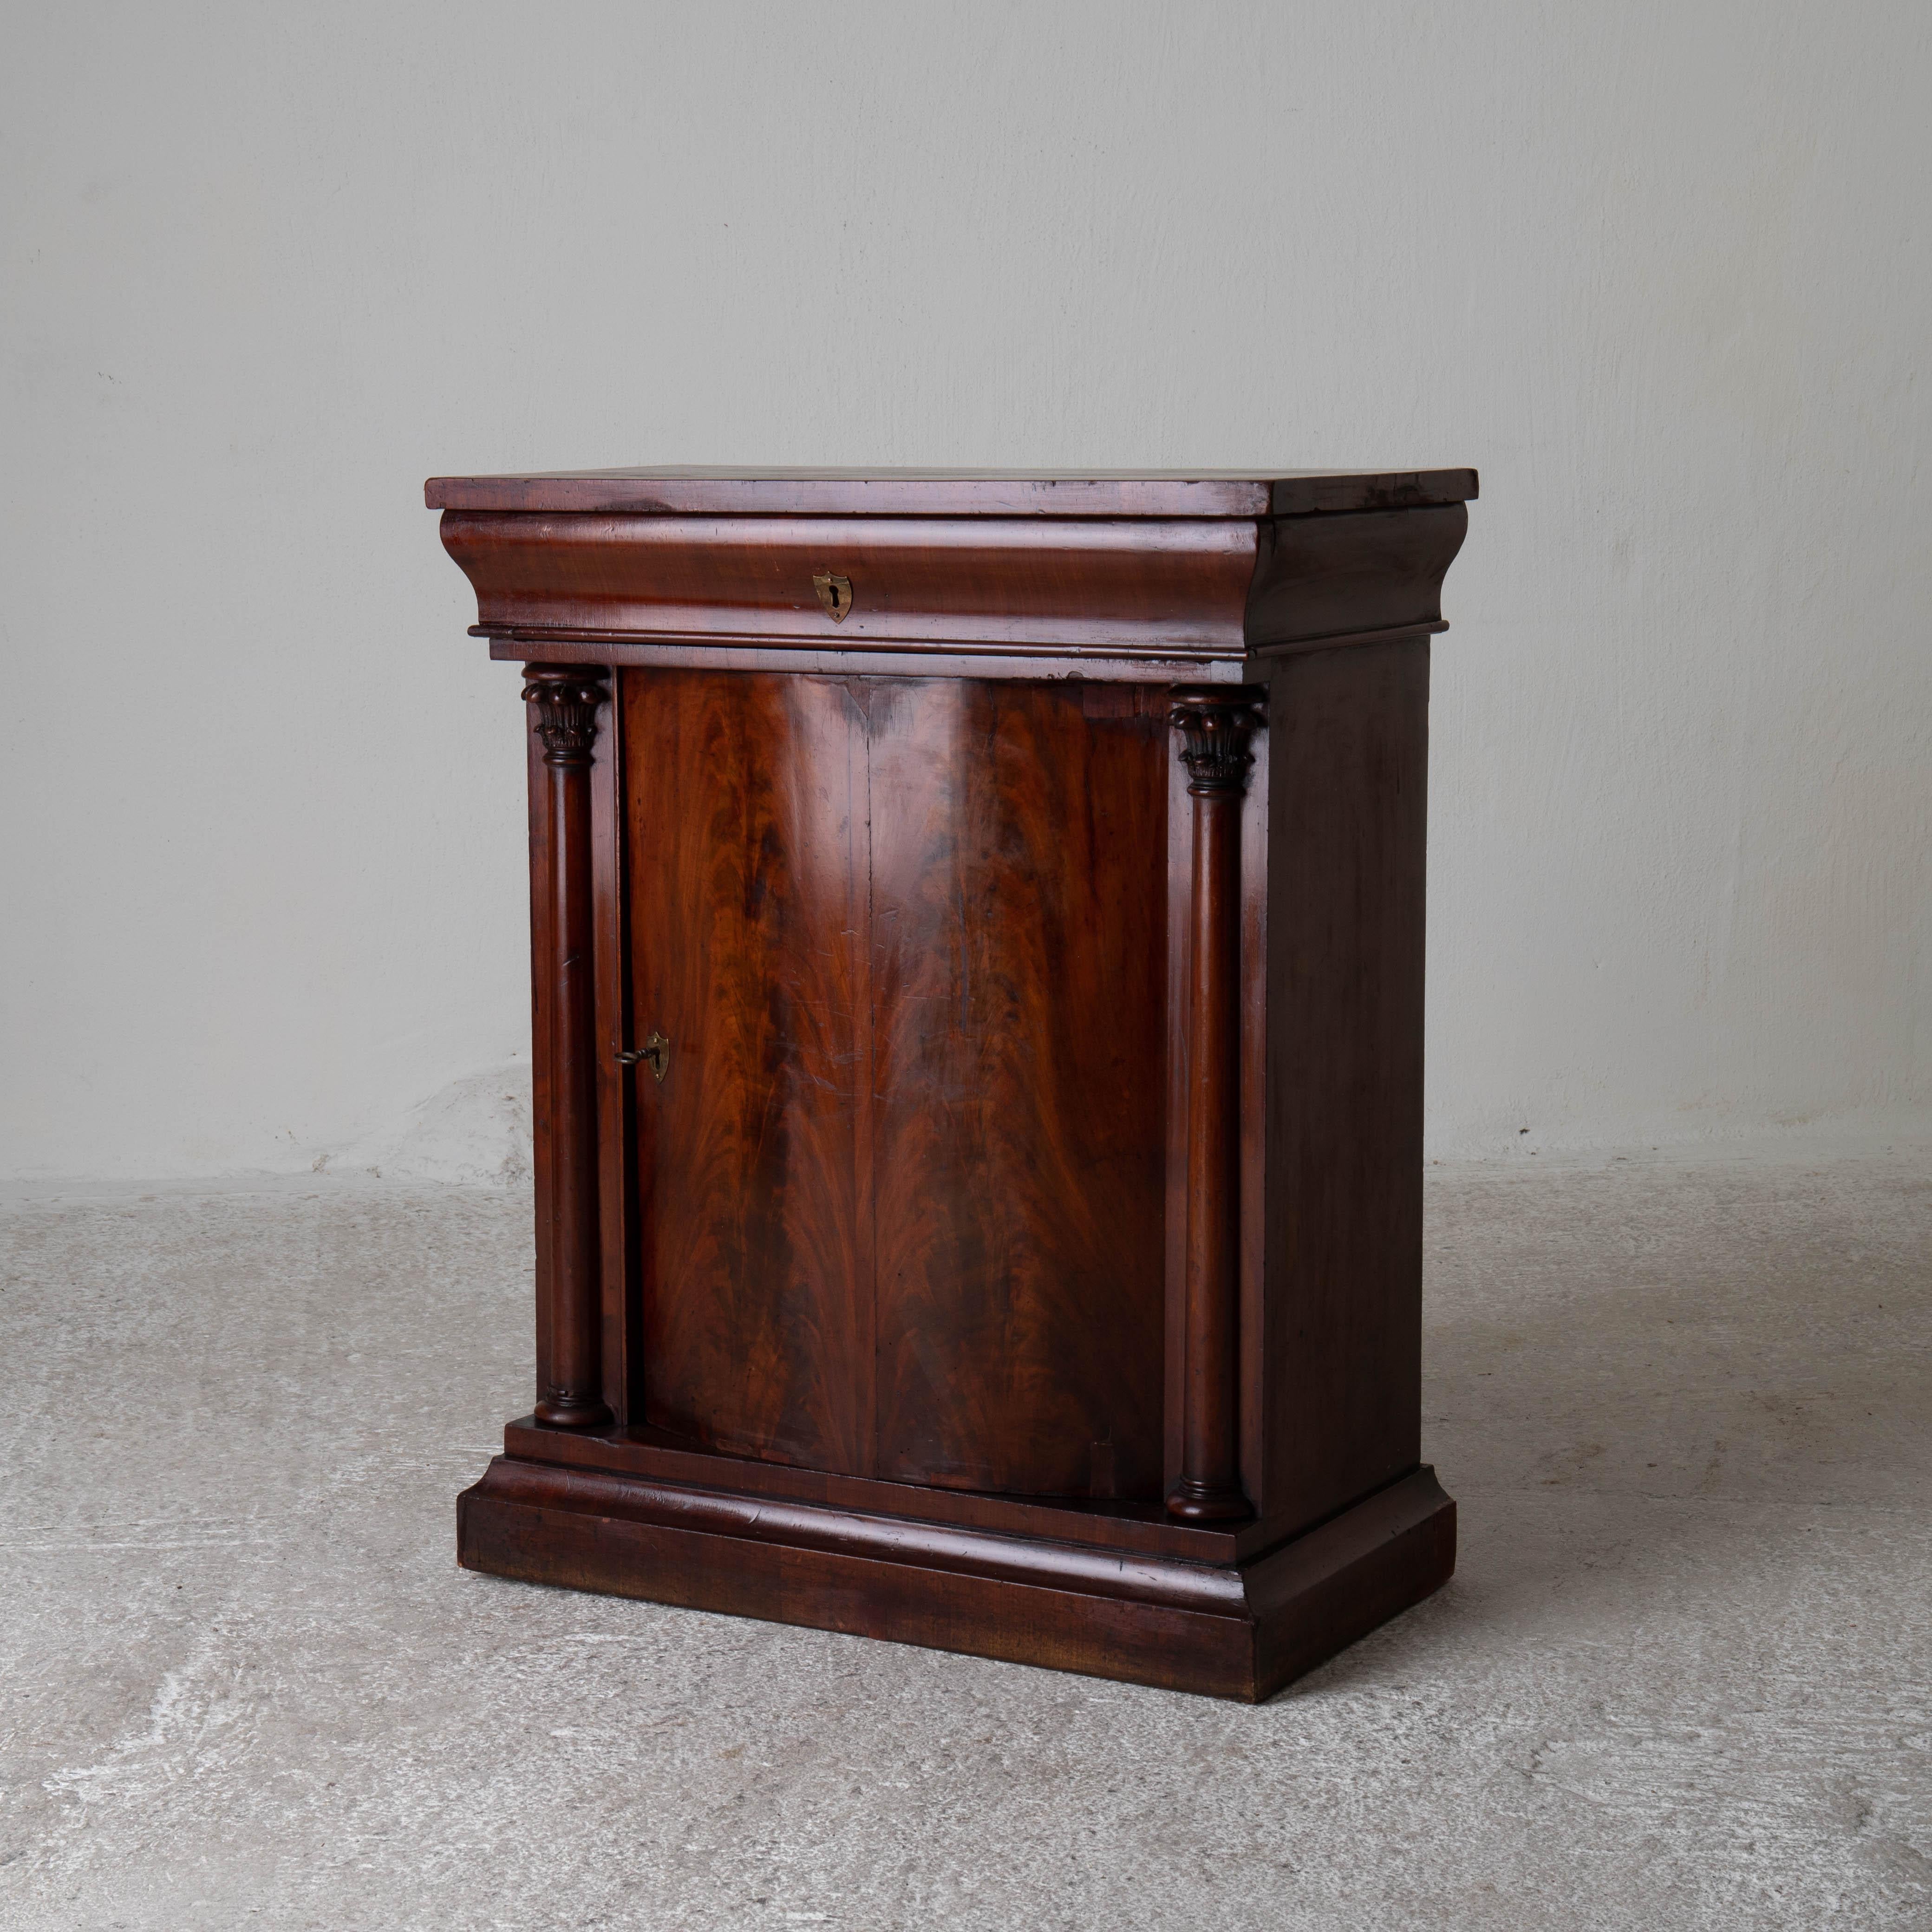 Nightstand side table Swedish mahogany 19th century neoclassical Sweden. A nightstand or side table in dark brown mahogany made during the Karl Johan Period 1810-1830 in Sweden. Curved door with a shelf interior. Drawers below the top. Column shaped